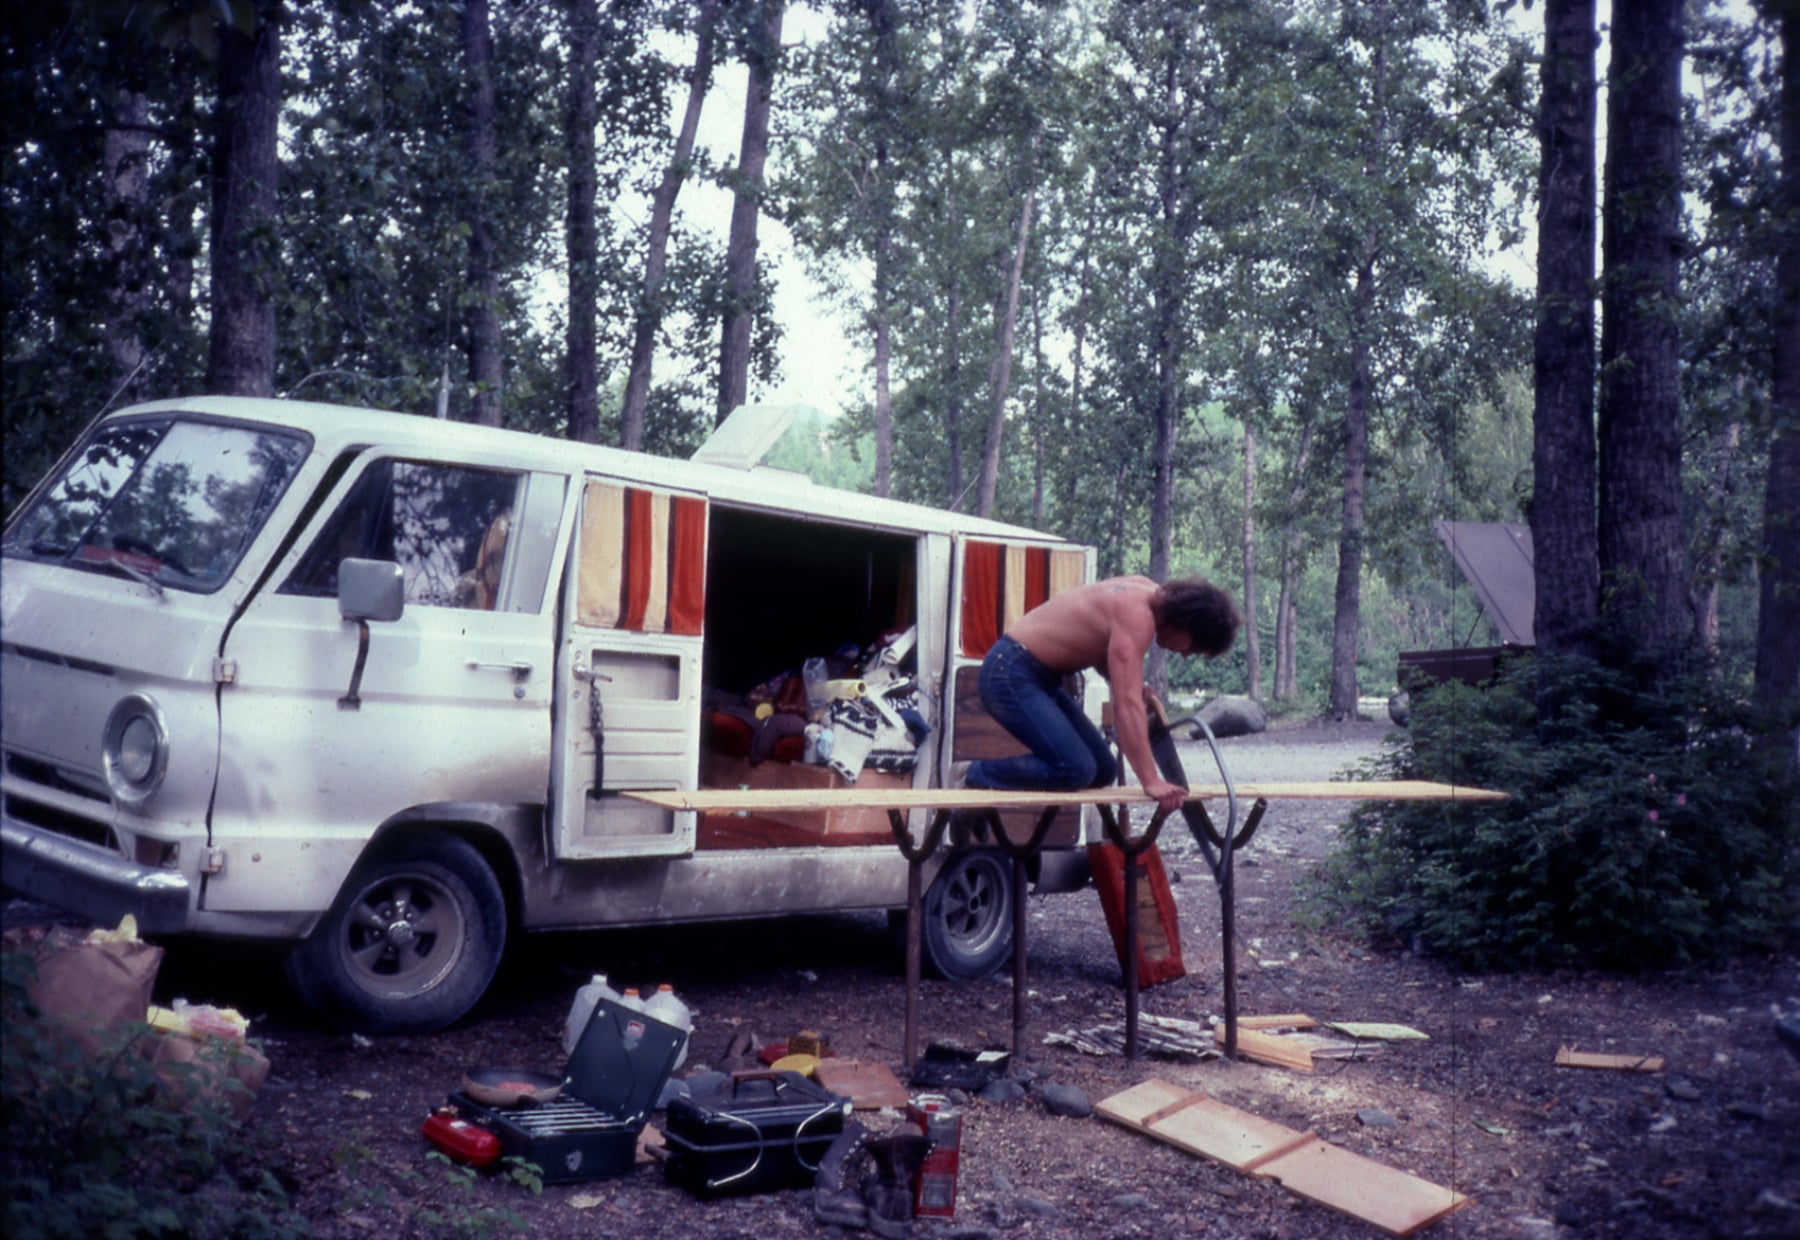 Early photograph of Peter Lik cutting wood next to his vintage white van in the woods of Alaska